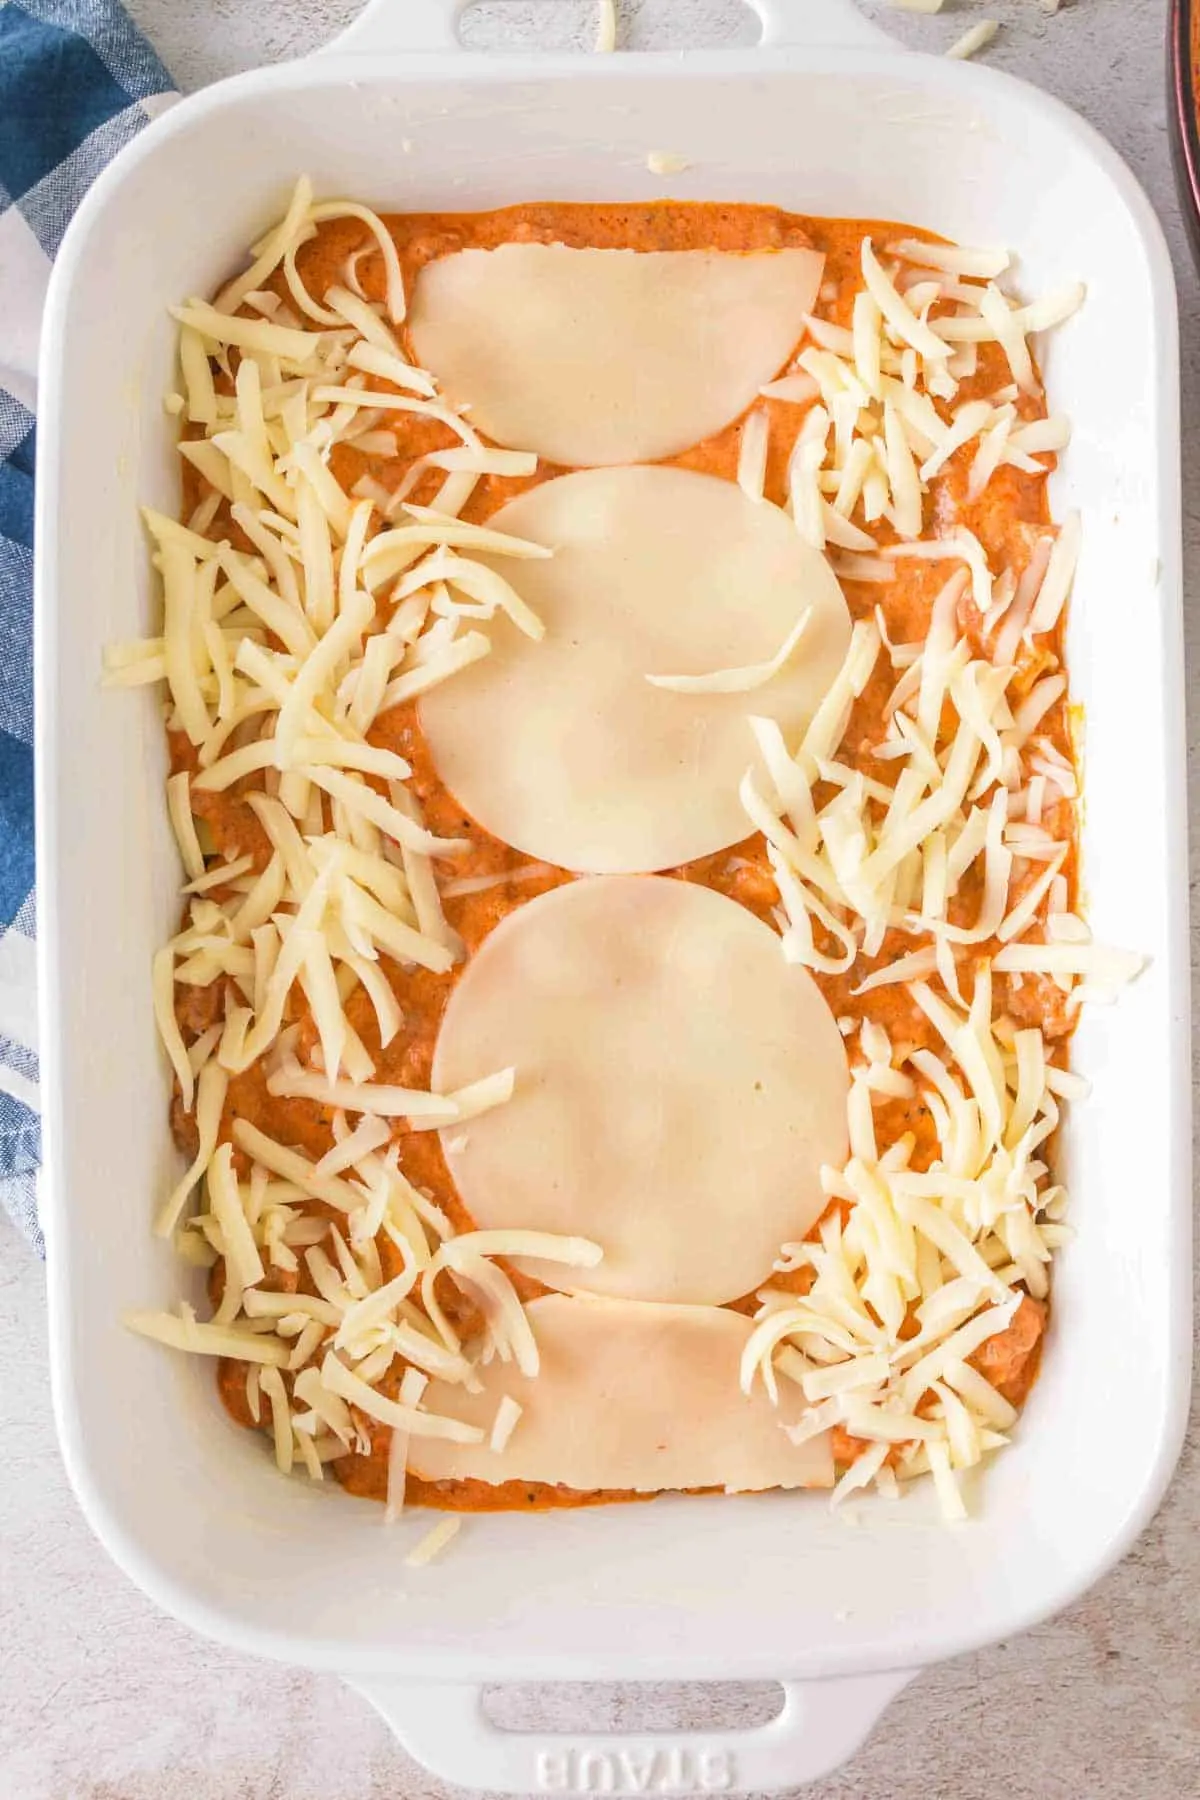 provolone cheese slices and shredded mozzarella cheese on top of ziti and sauce in a baking dish